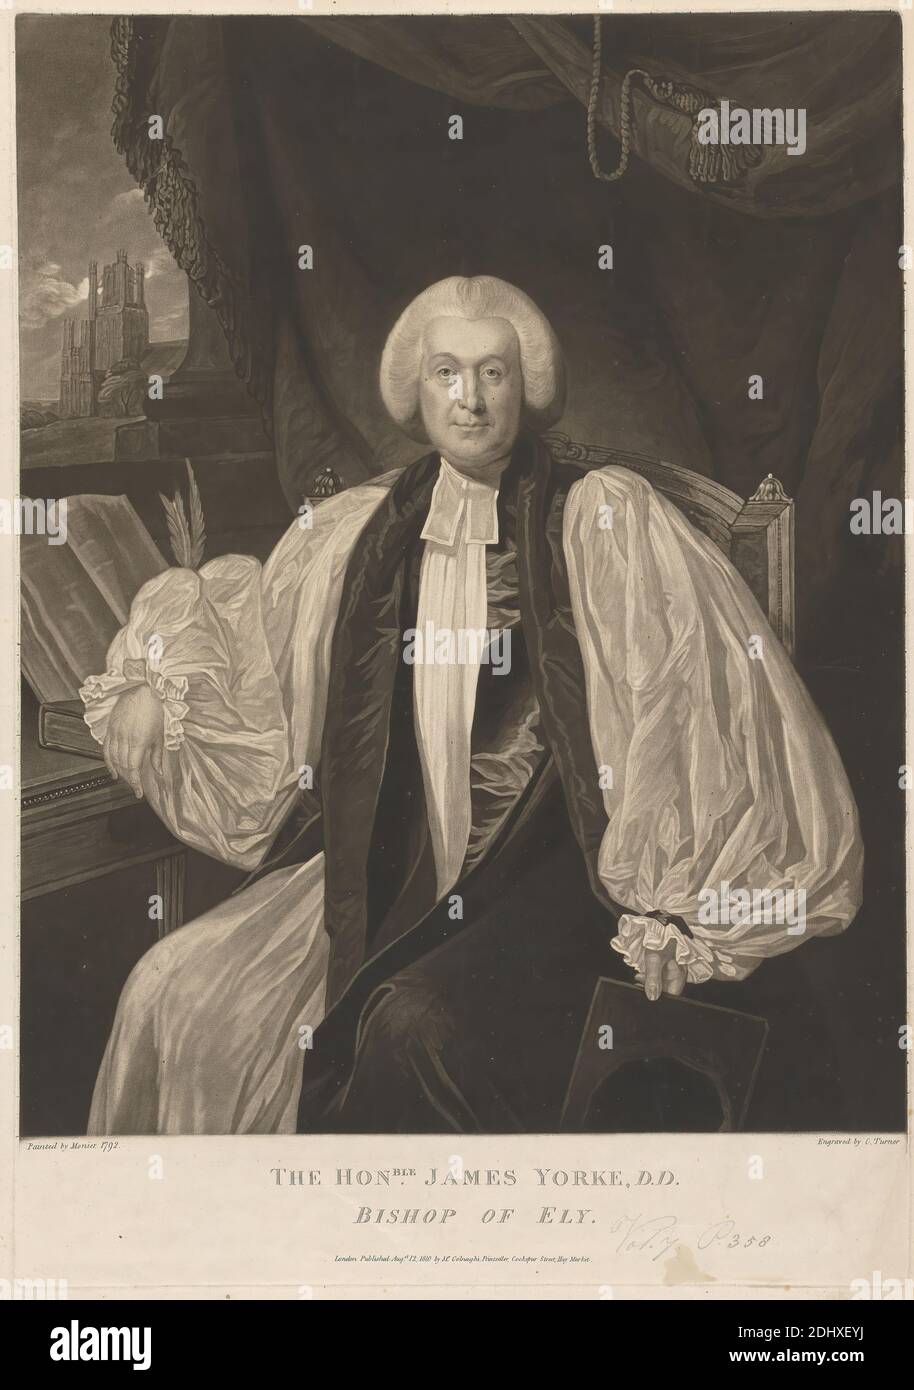 Hon. James Yorke, Bishop of Ely, Charles Turner, 1774–1857, British, after Jean Laurent Mosnier, 1743/44–1808, French, active in Britain (1790–96), 1810, Mezzotint on moderately thick, slightly textured, cream, wove paper, Sheet: 20 1/2 × 14 9/16 inches (52.1 × 37 cm), Plate: 19 15/16 × 13 15/16 inches (50.6 × 35.4 cm), and Image: 17 1/2 × 13 7/8 inches (44.5 × 35.2 cm), bands, books, cathedral, curtain, man, portrait, quills, religious and mythological subject, tippet, window Stock Photo